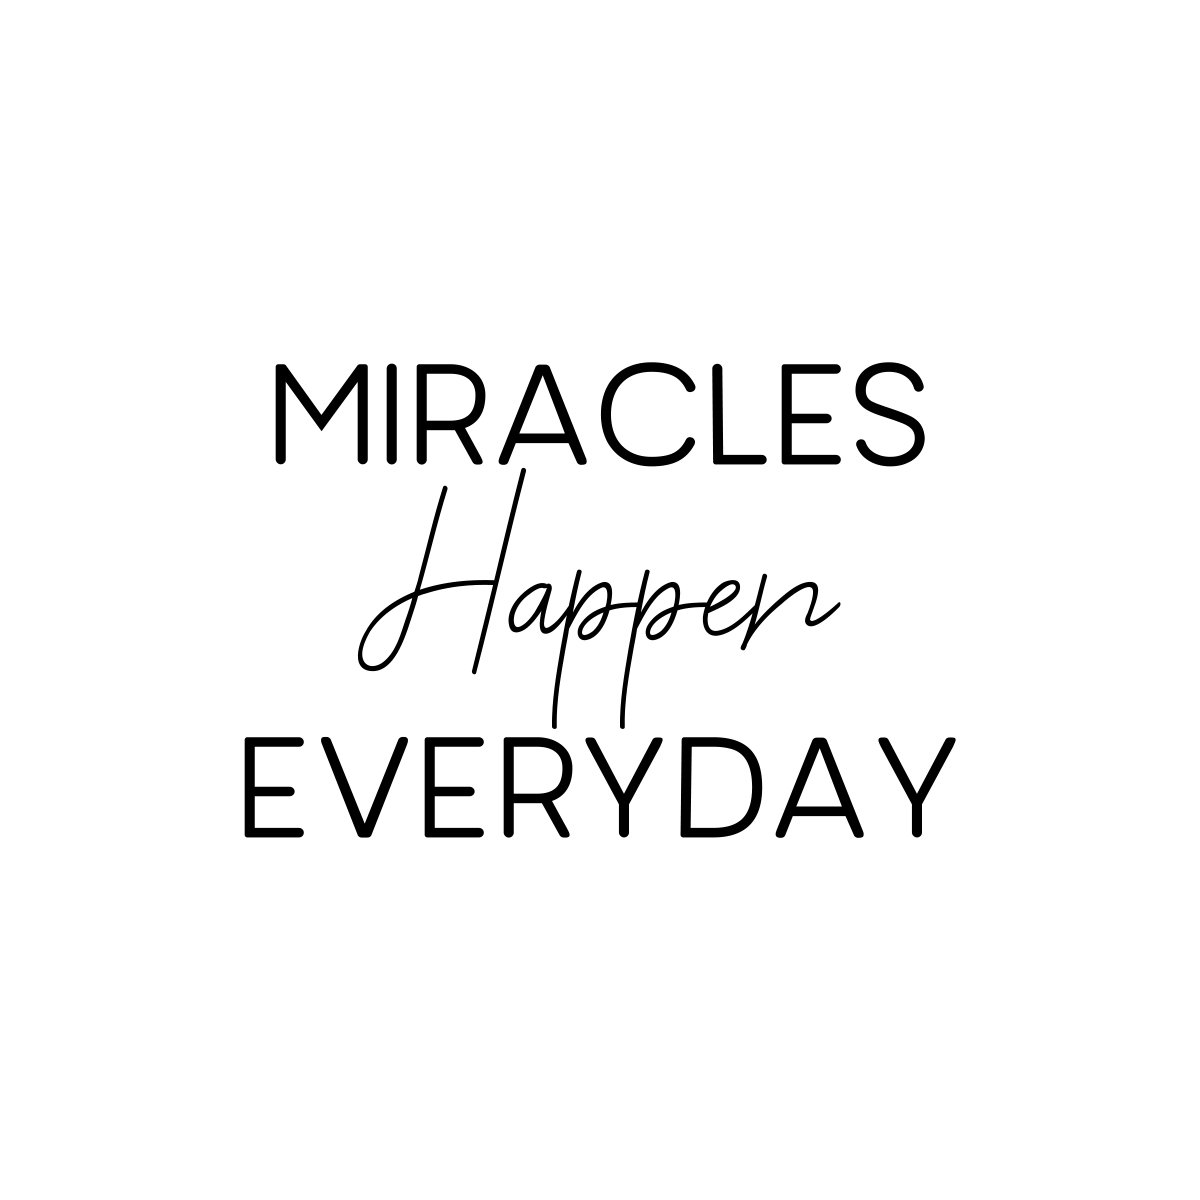 NAVEEN KANCHAN on X:  Miracles happen everyday  #miracles #happen # everyday #staystrongindia #staystrong #motivatedaily #inspiredaily   / X